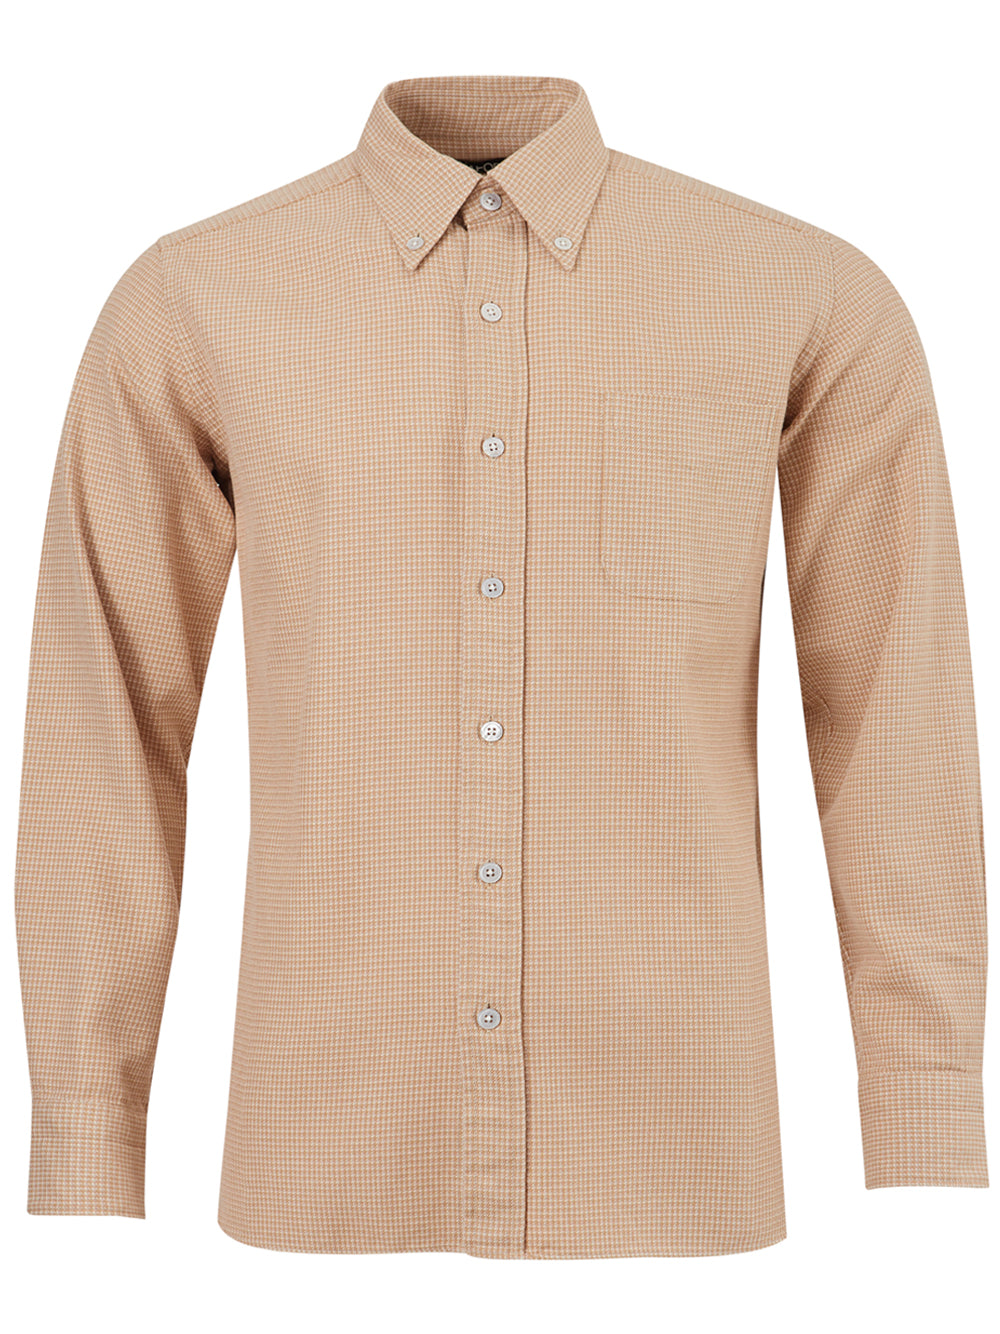 Tom Ford 'Knitted' micro print shirt